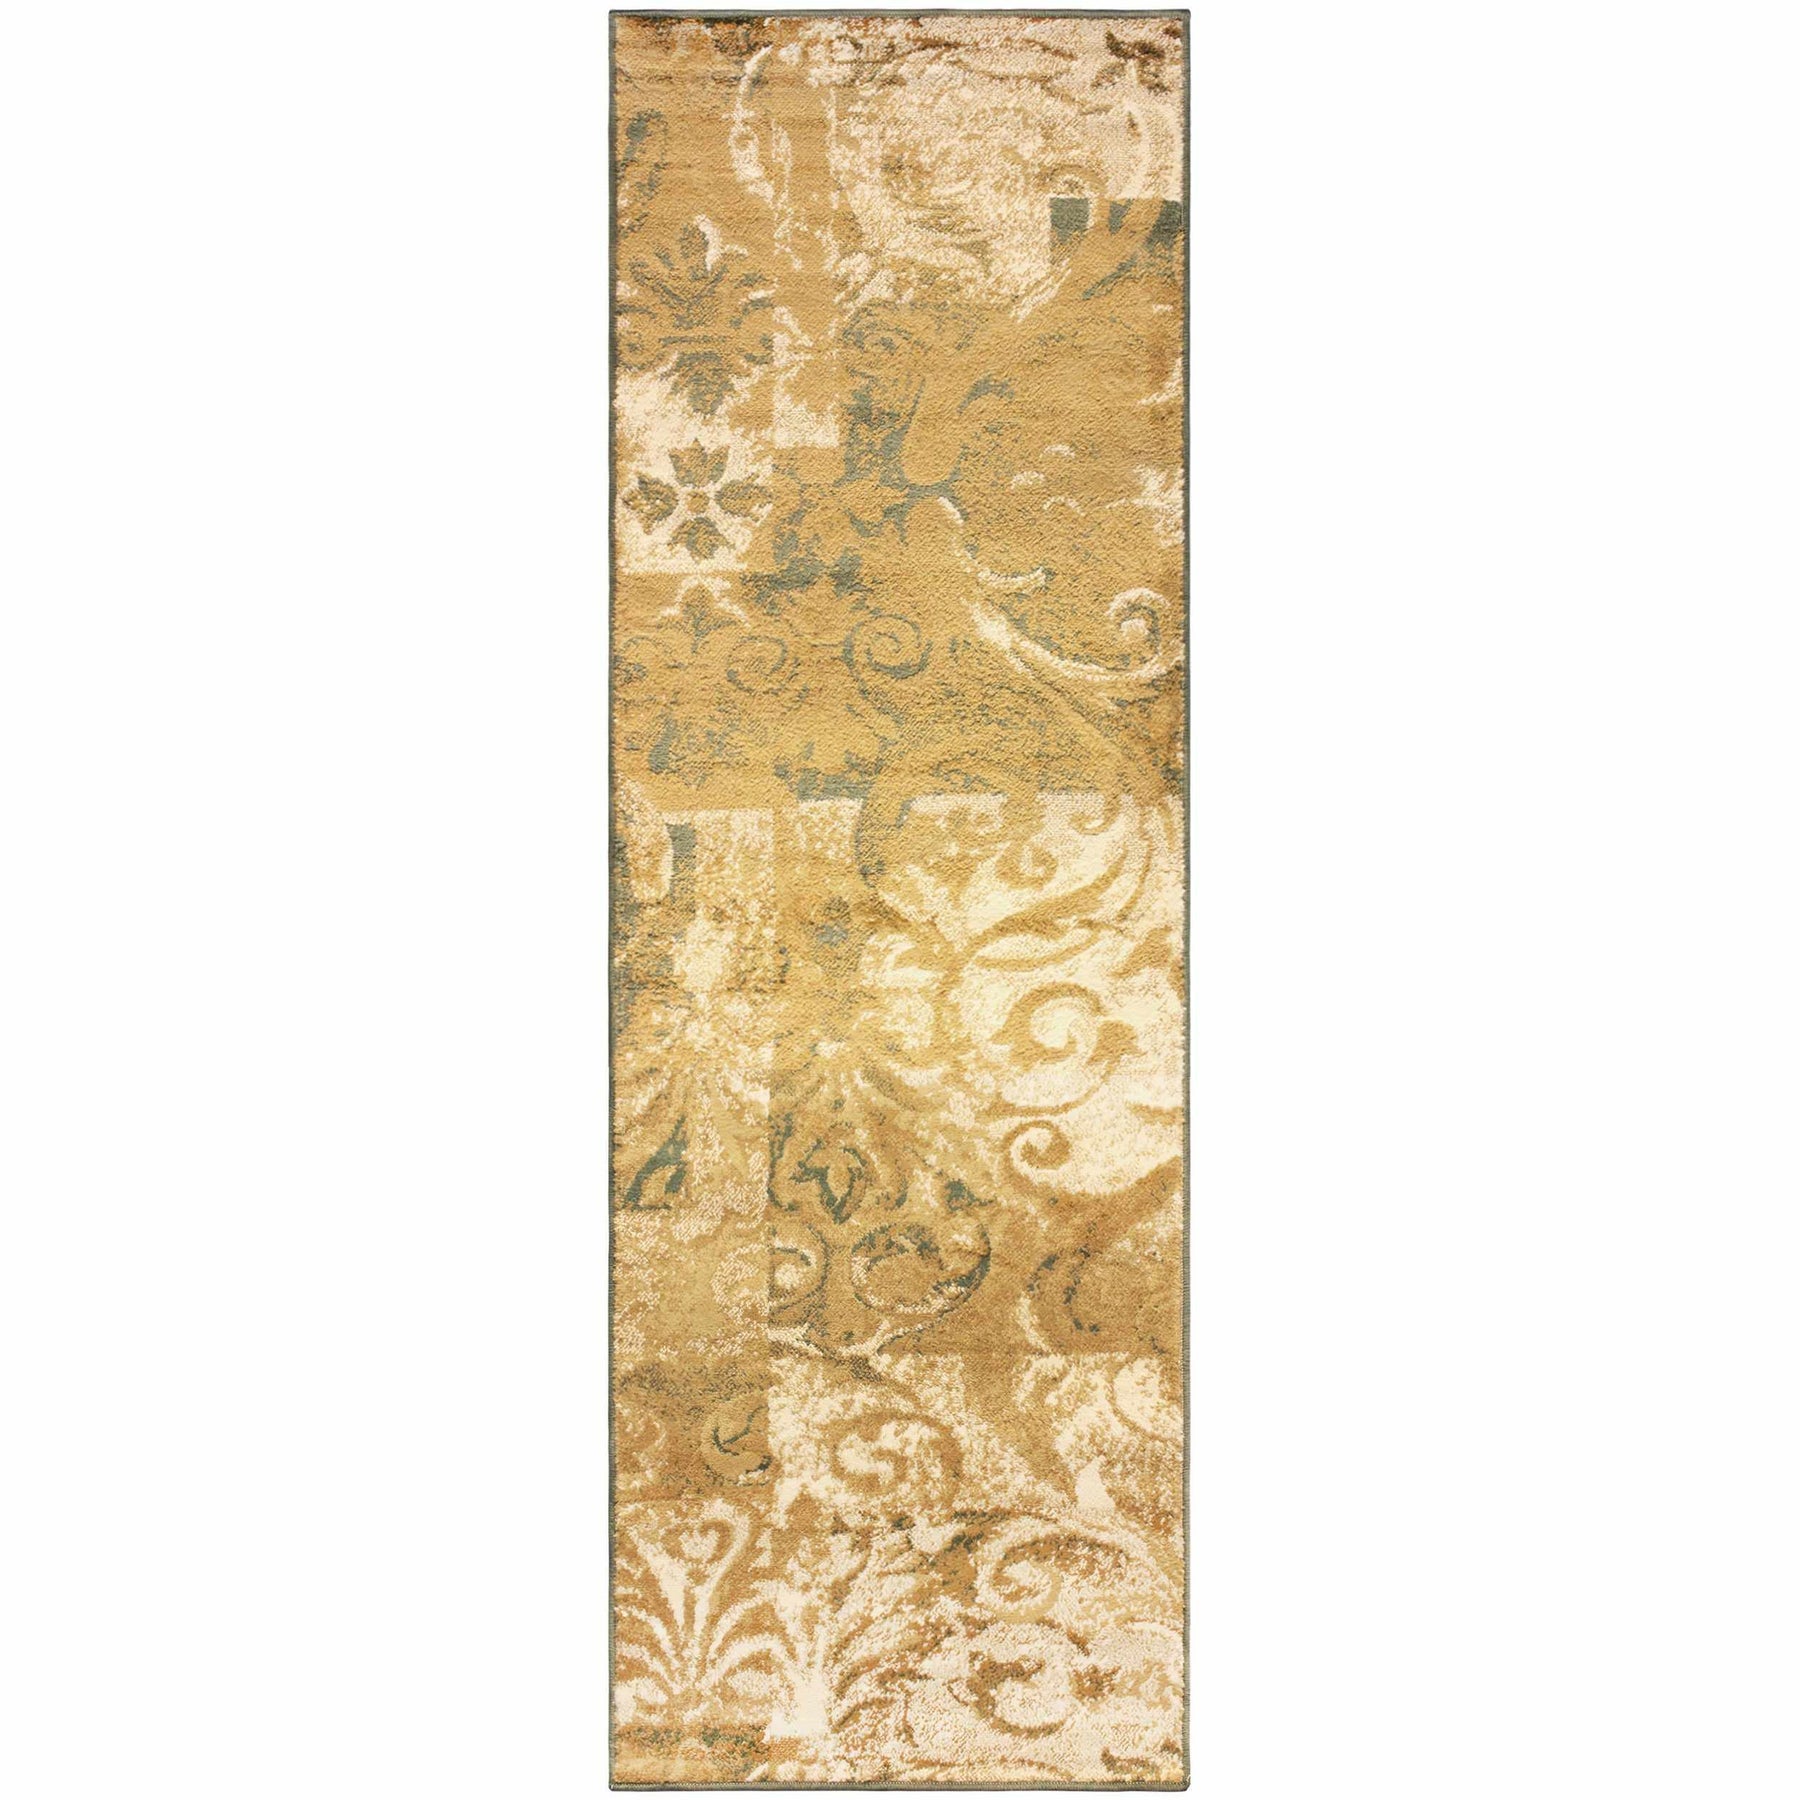  Distressed Scroll Contemporary Area Rug